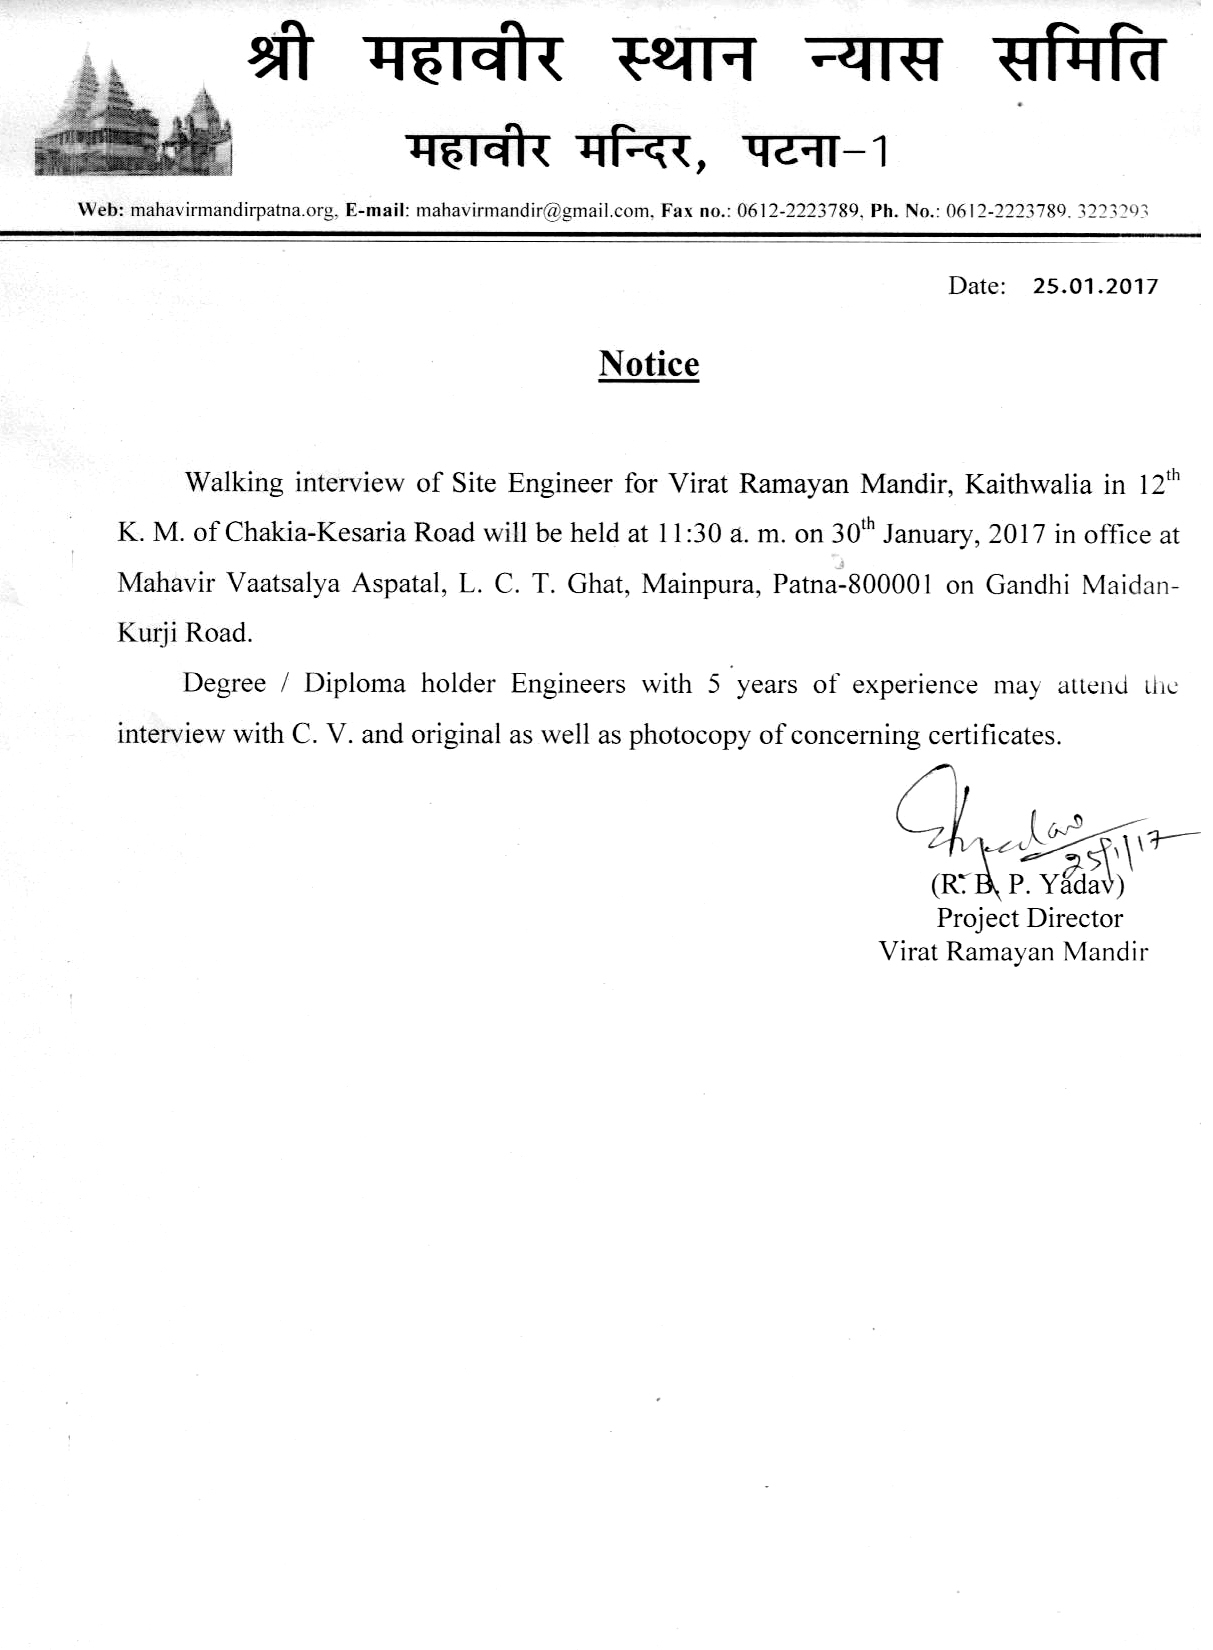 Notice for Walking Interview of Site Engineer